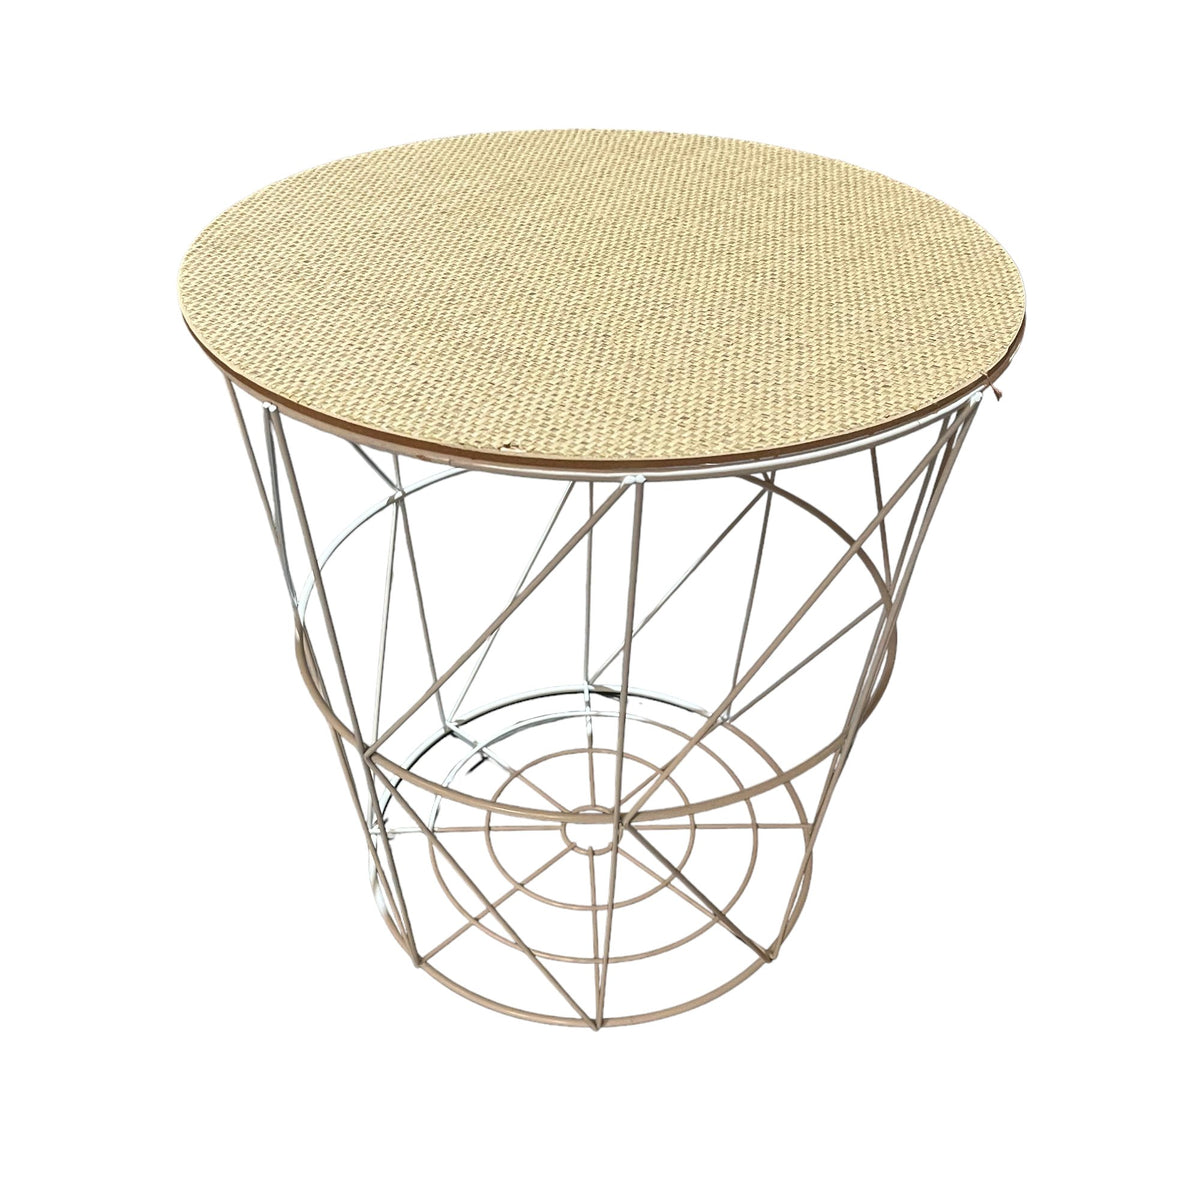 Neutral Wood Top Basket Side Table - Cherish Home